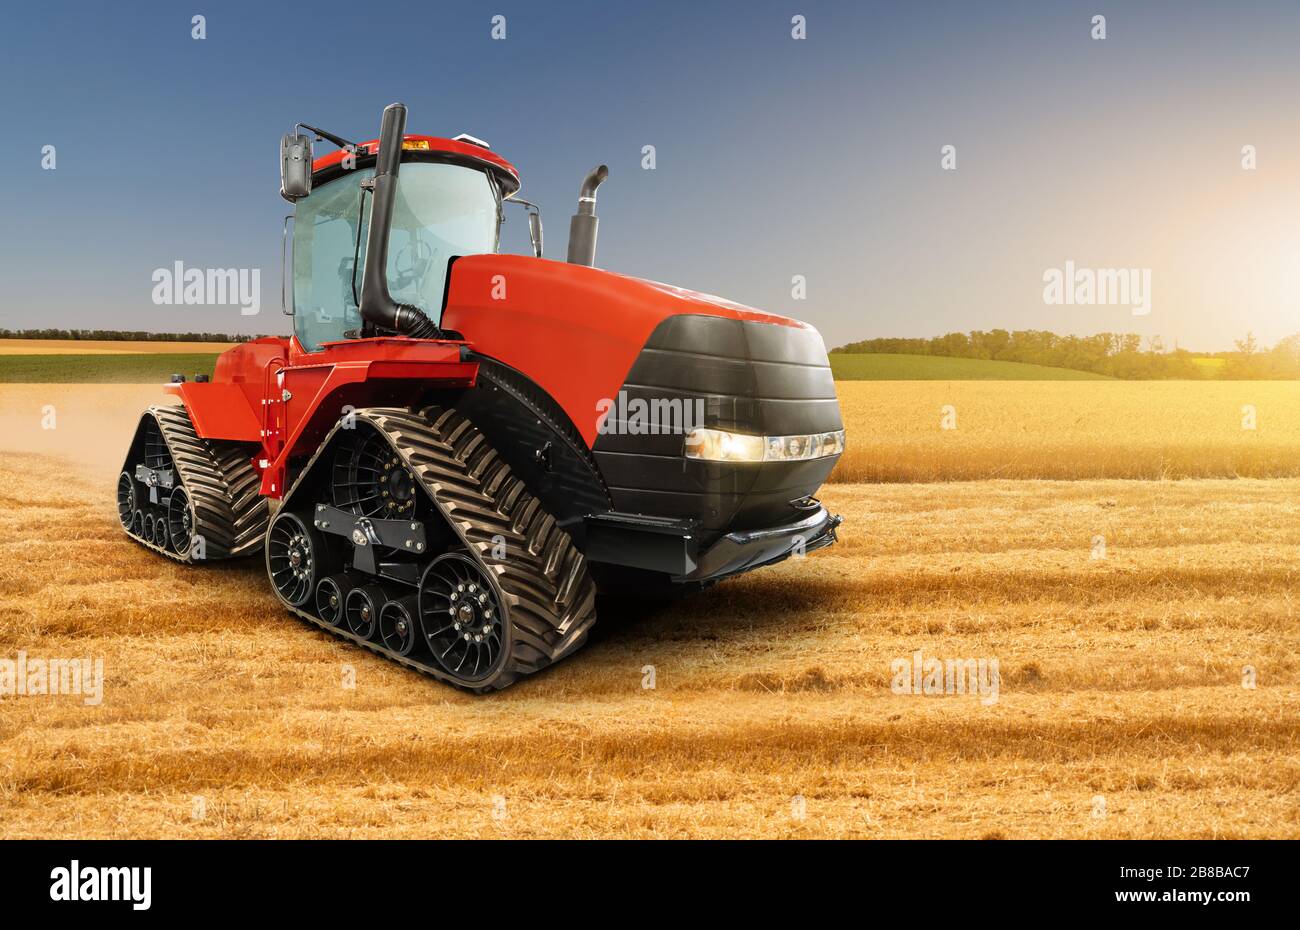 Red rubber tracked agricultural tractor Stock Photo